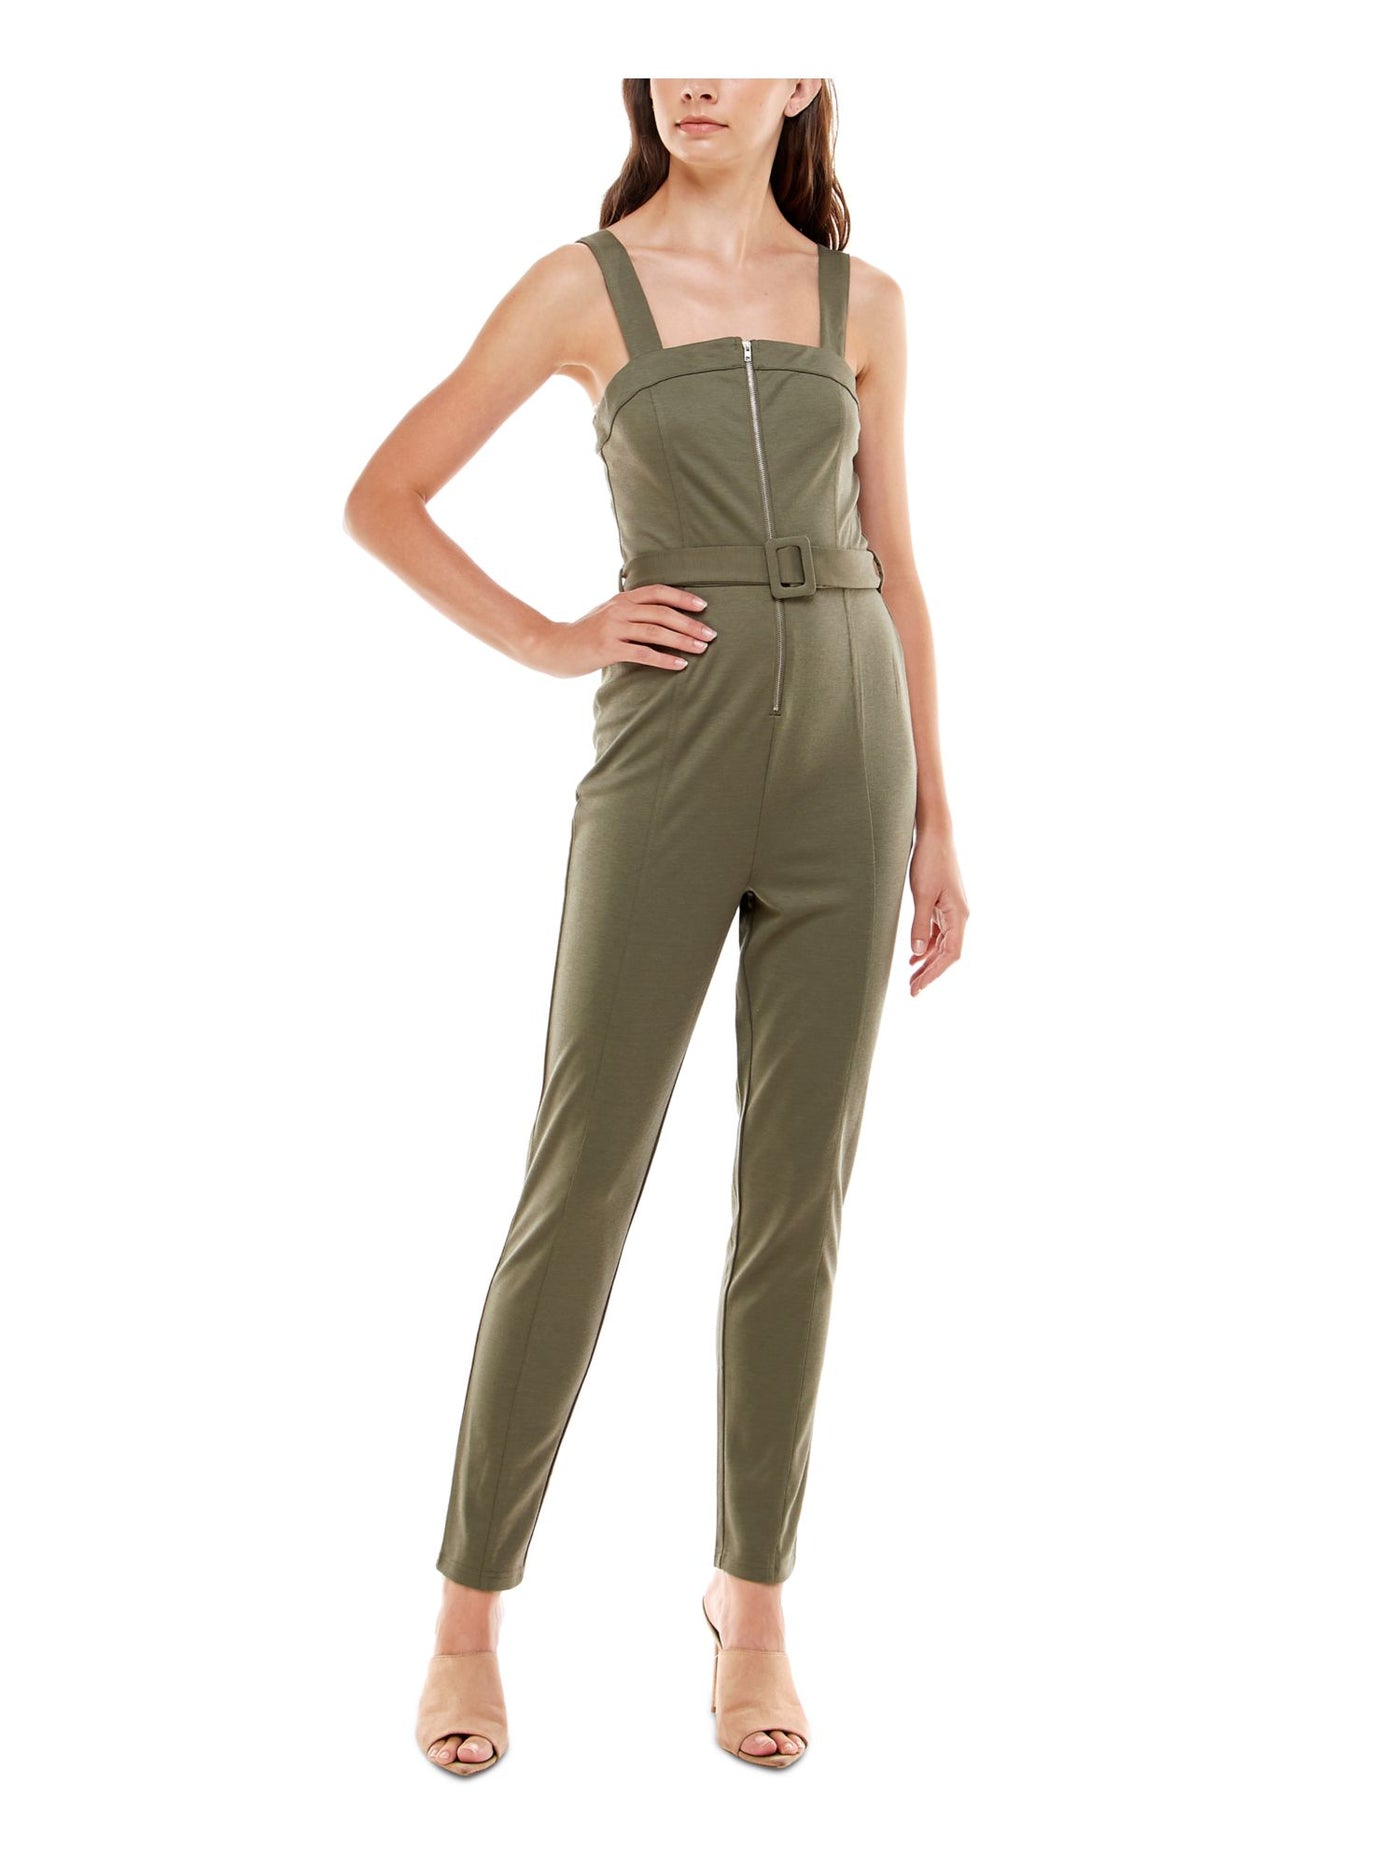 ALMOST FAMOUS Womens Green Belted Zippered Sleeveless Square Neck Skinny Jumpsuit Juniors XL